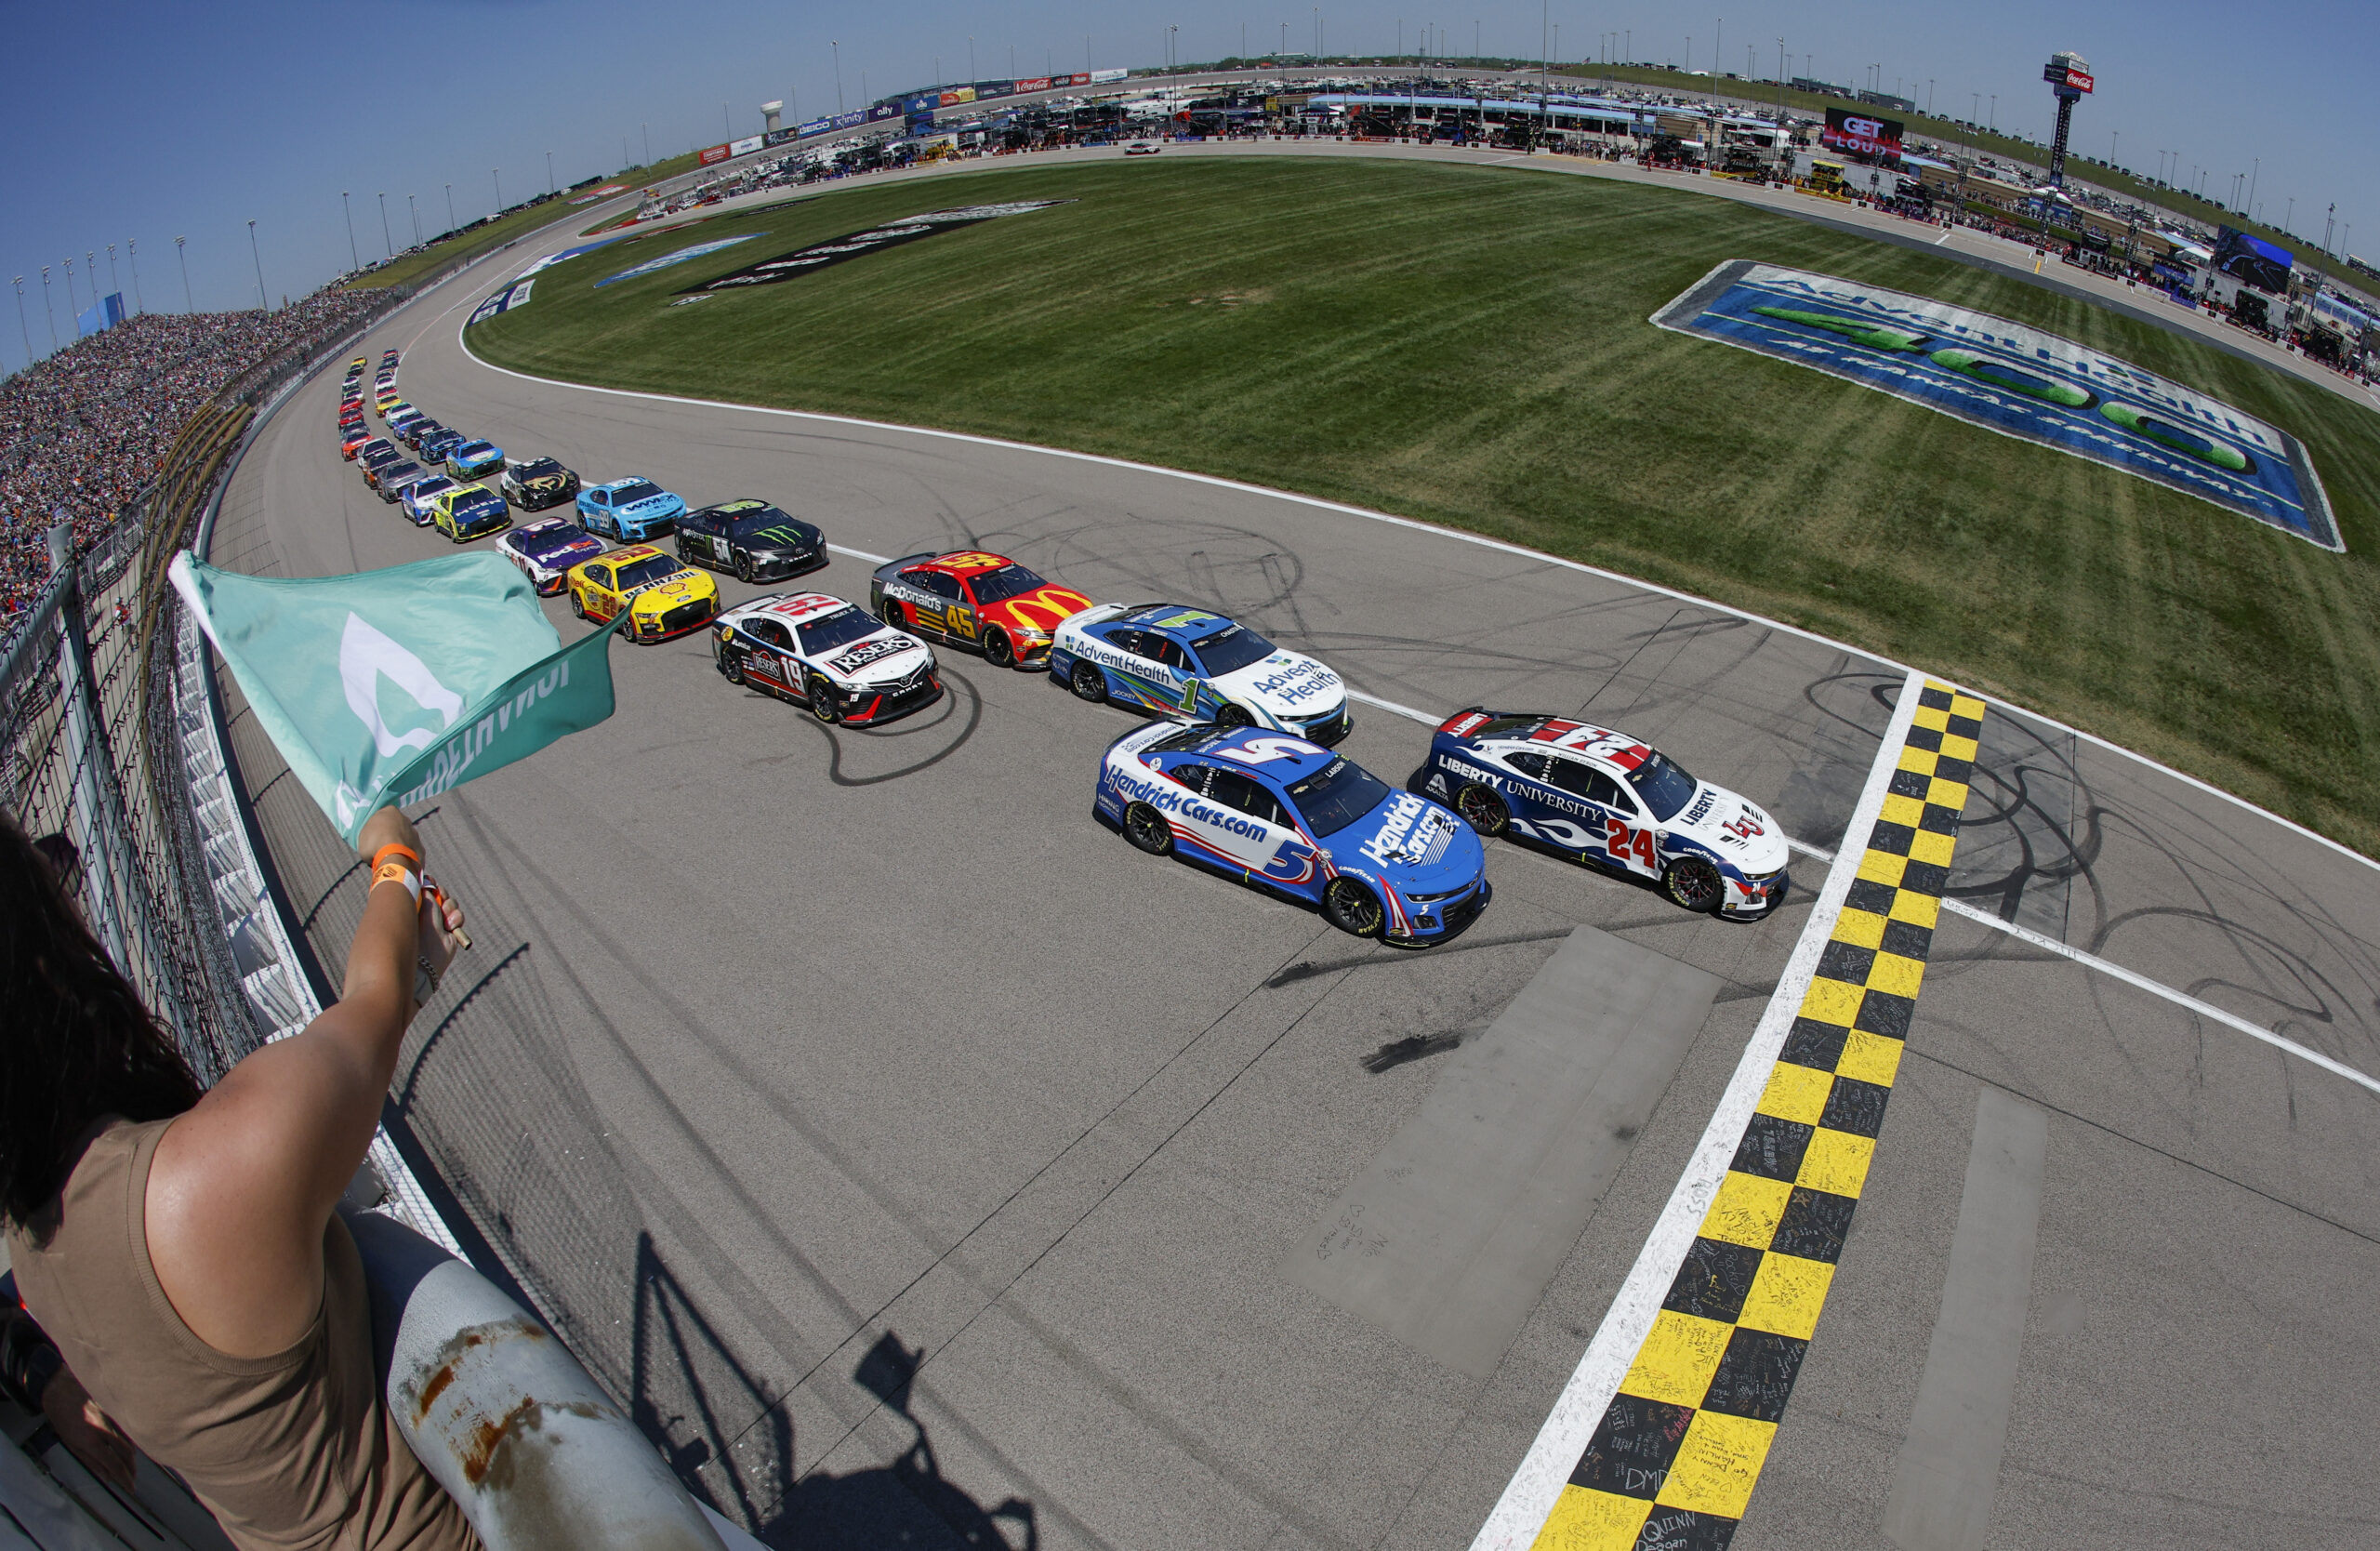 Who Will Find No Place Like Home in Kansas Victory Lane?